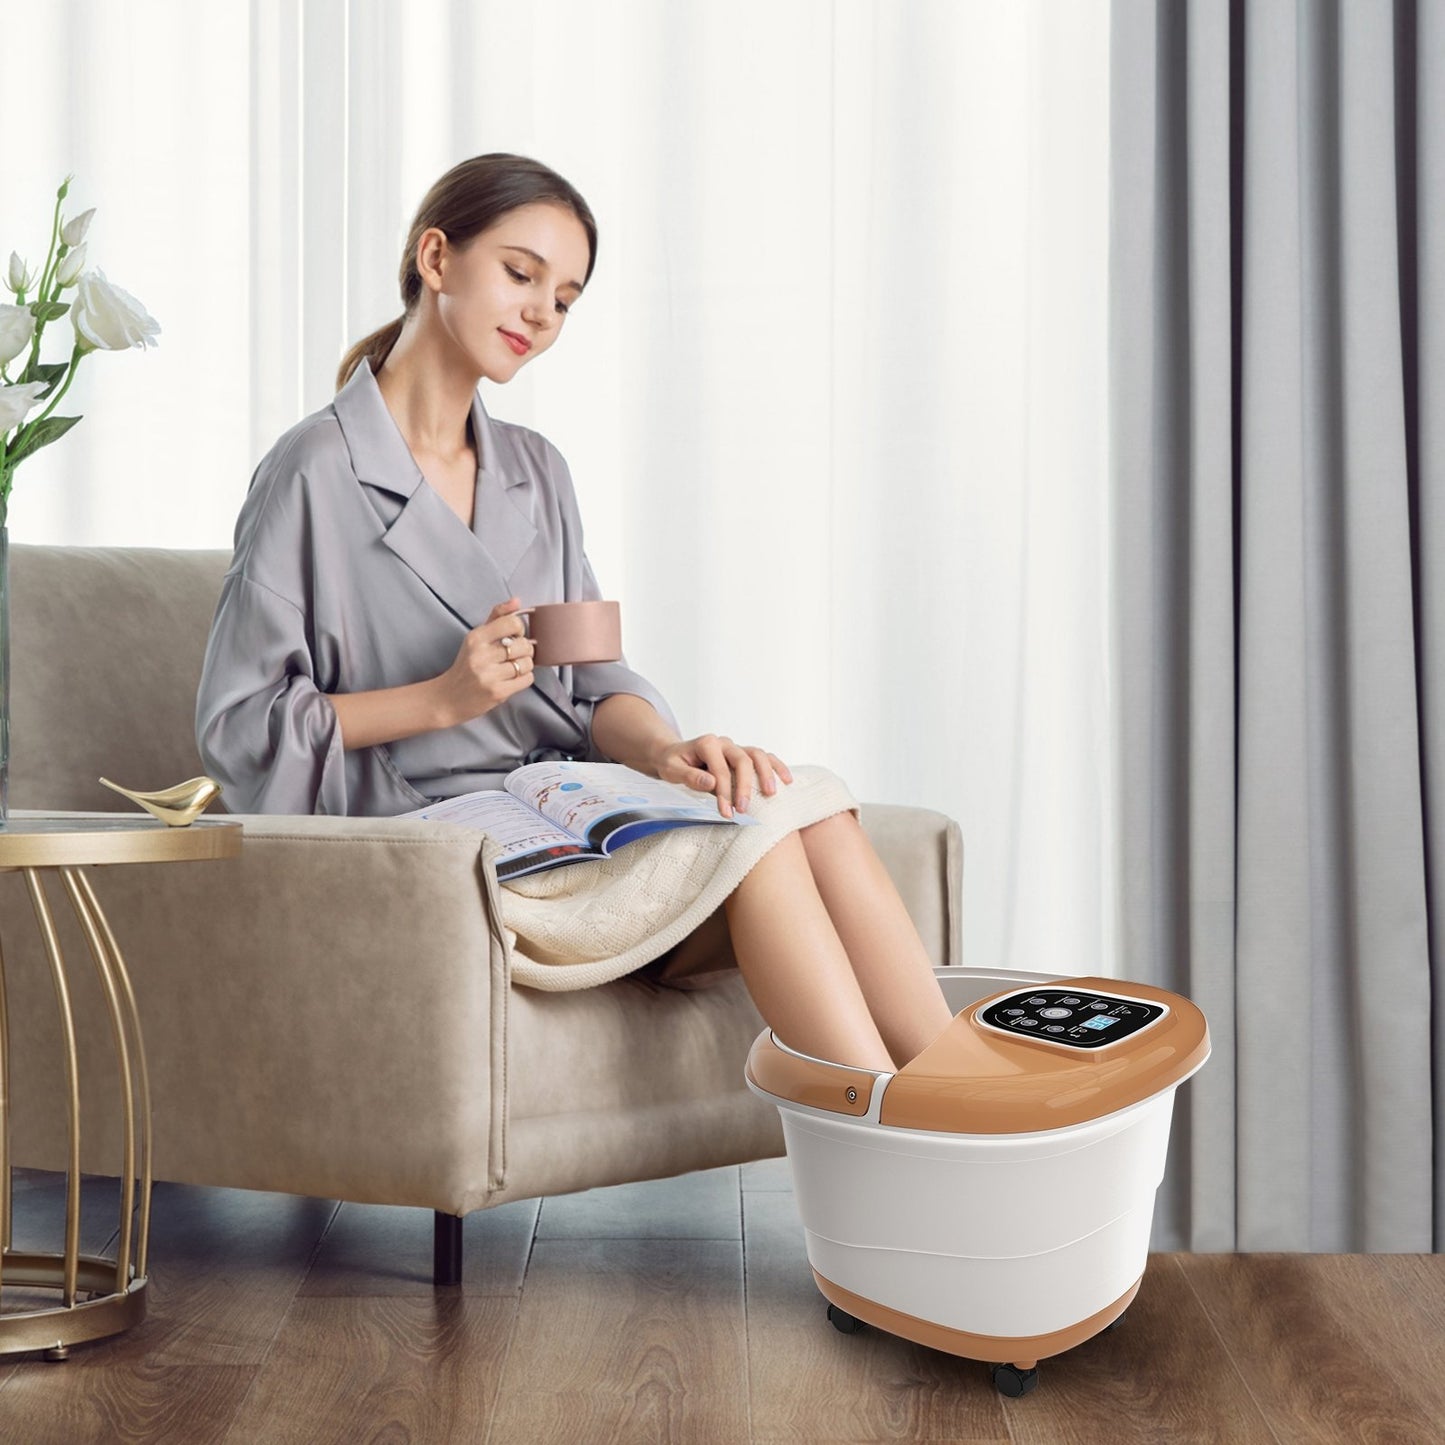 All-in-One Heat Bubble Vibration Foot Spa Massager with 6 Massage Rollers - Gallery Canada